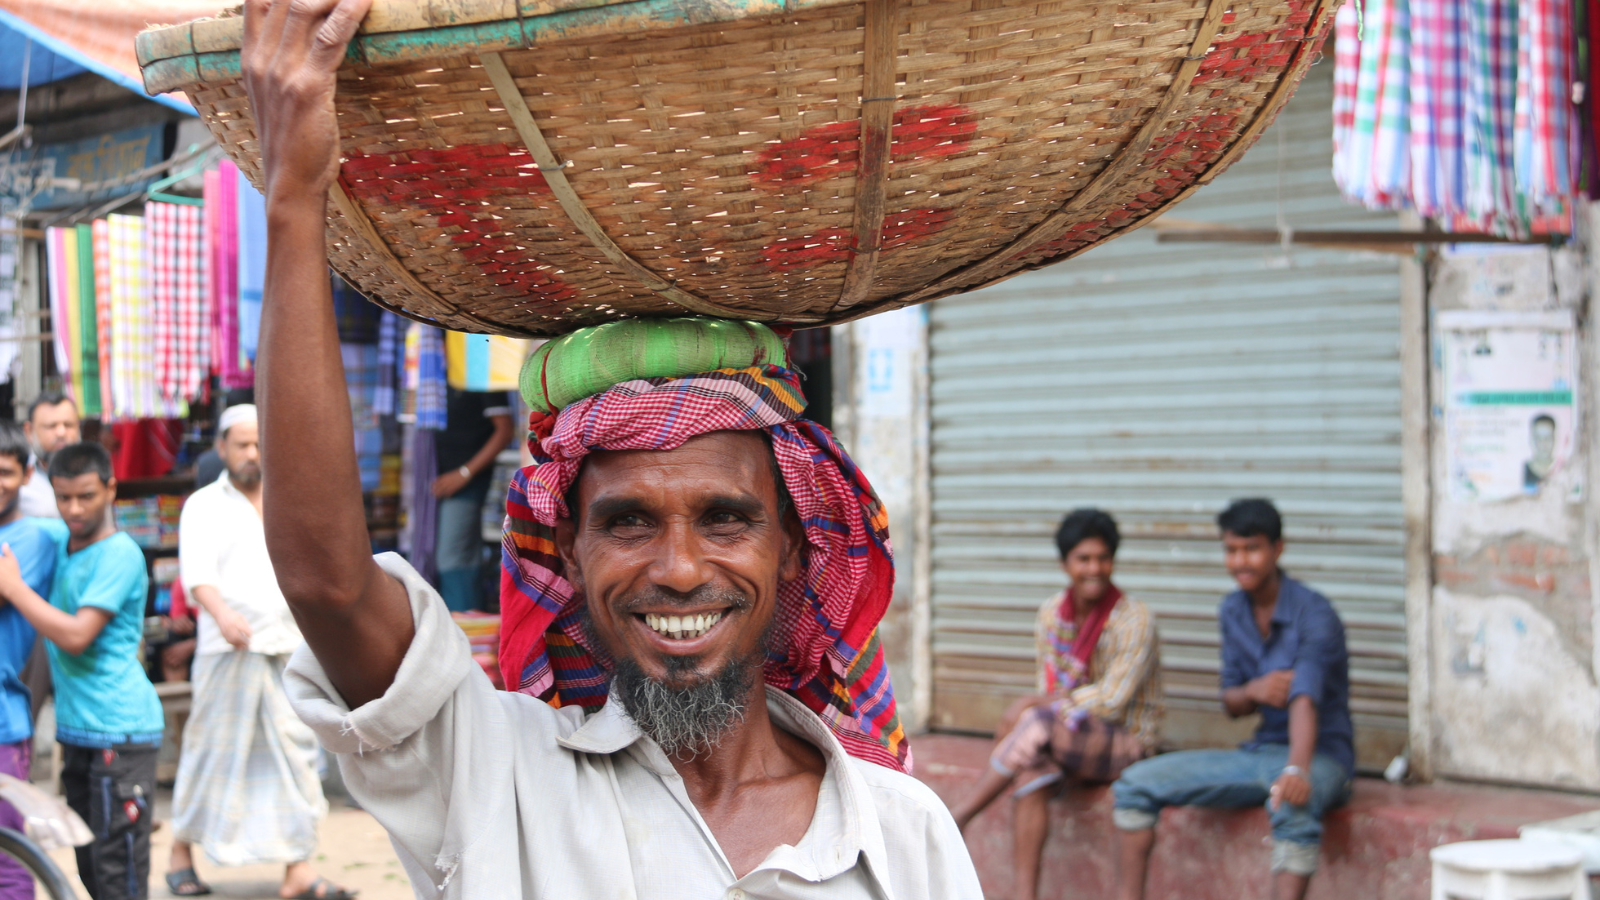 smiling man with basket on head